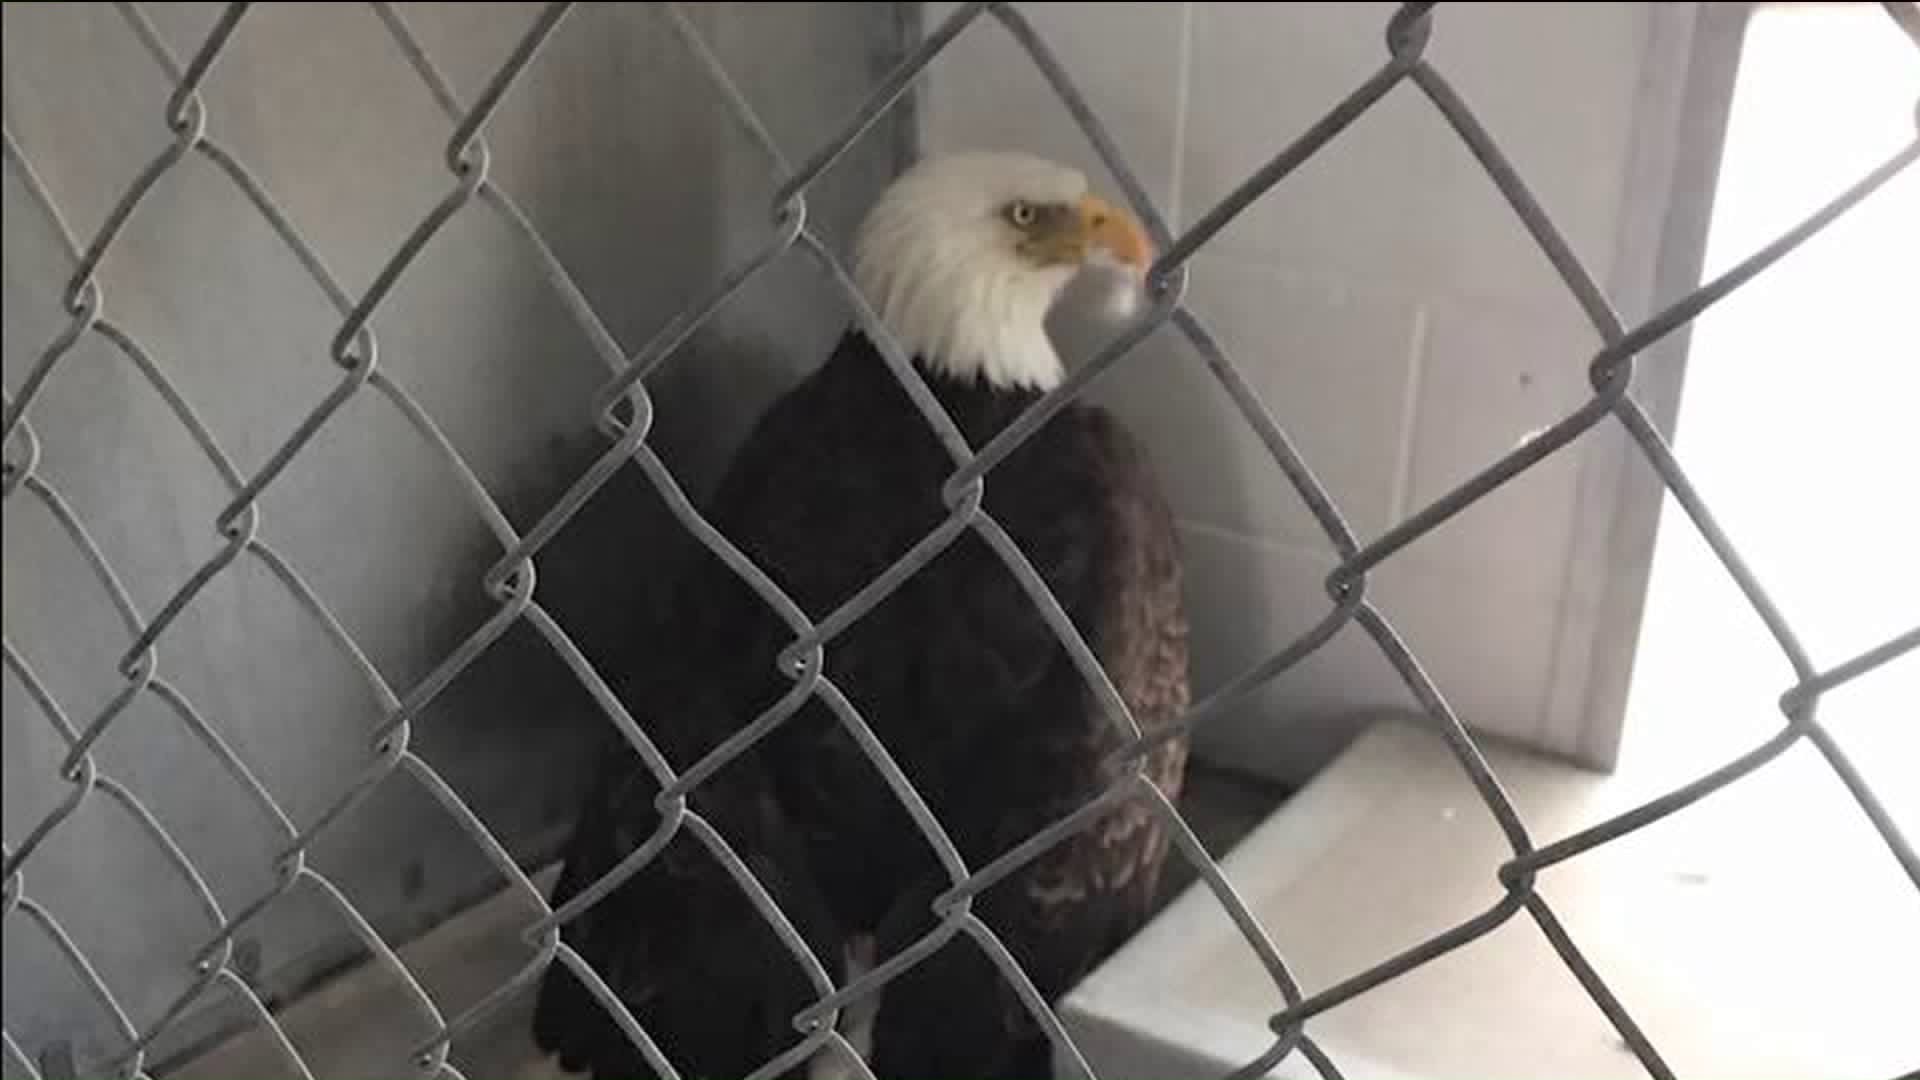 Rehabbed bald eagle set free in Suffield